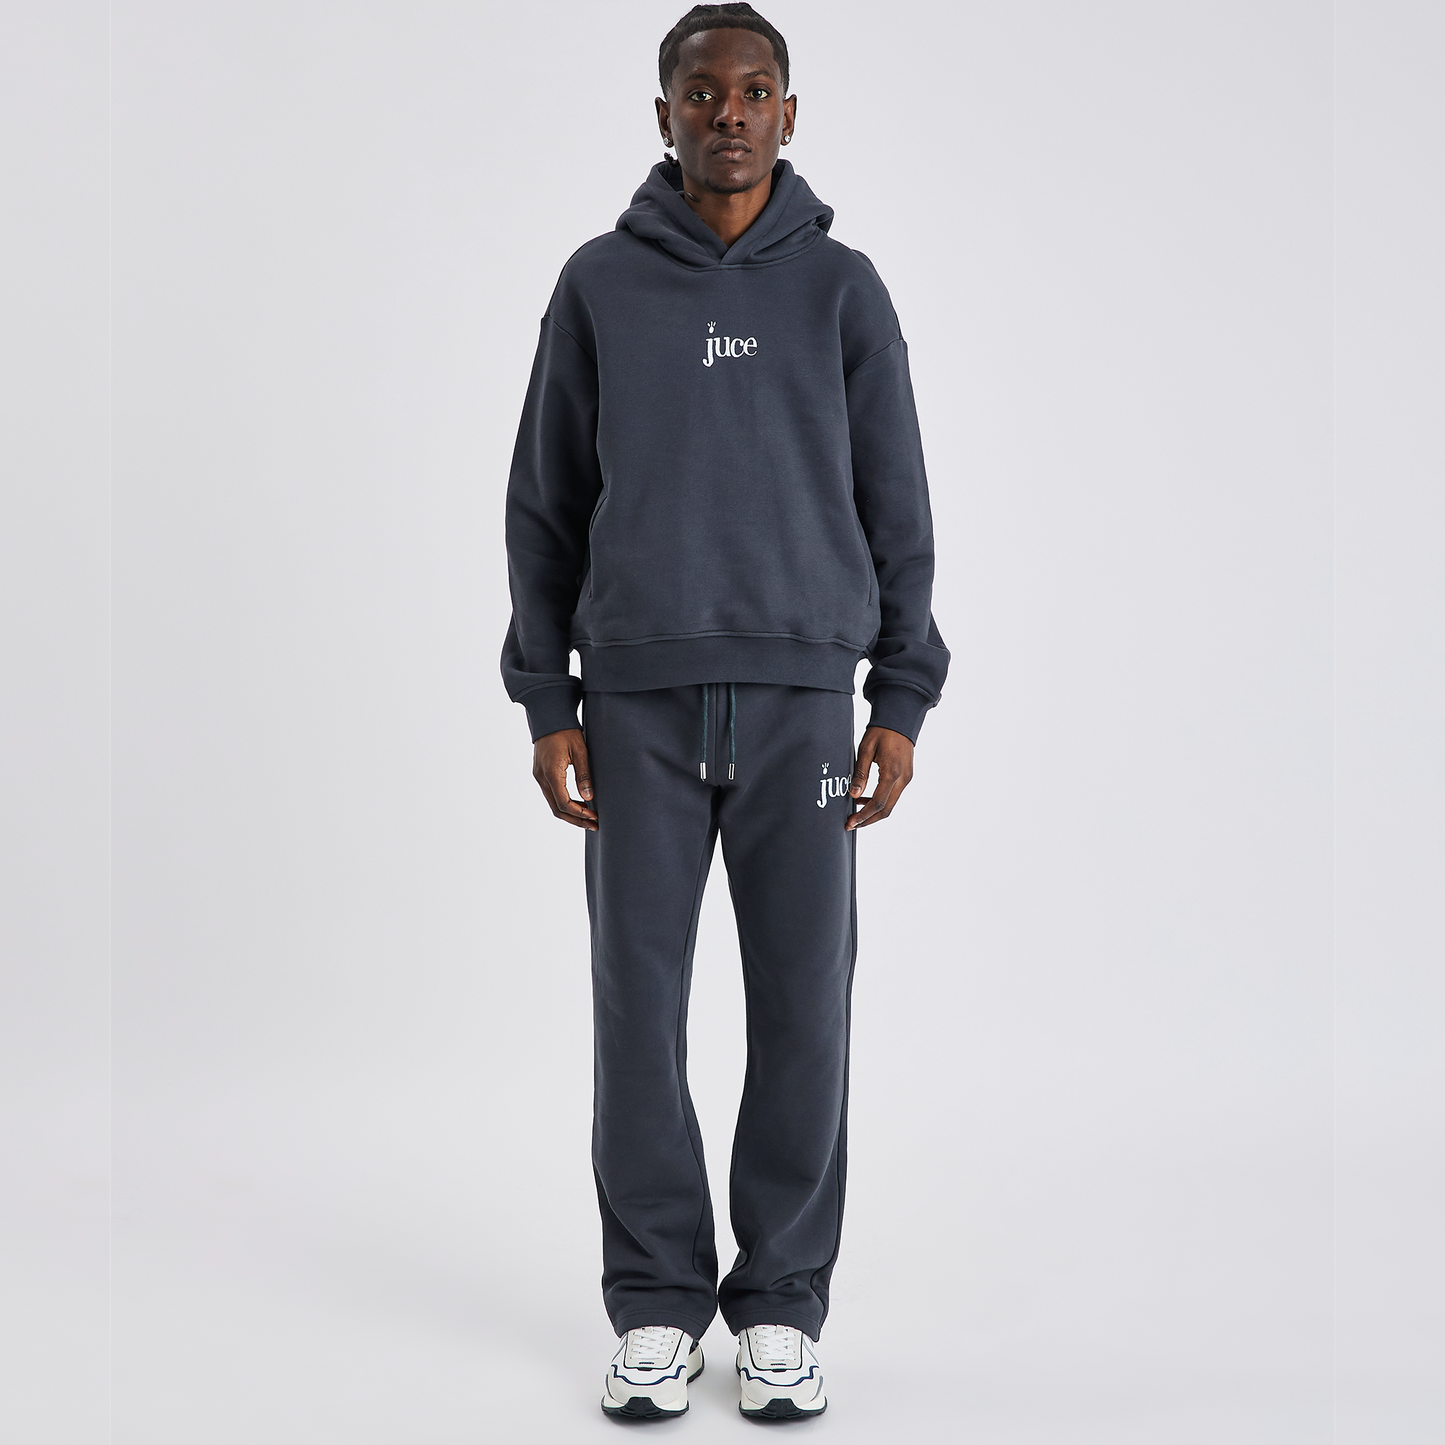 Relaxed Hale Navy Sweatpants